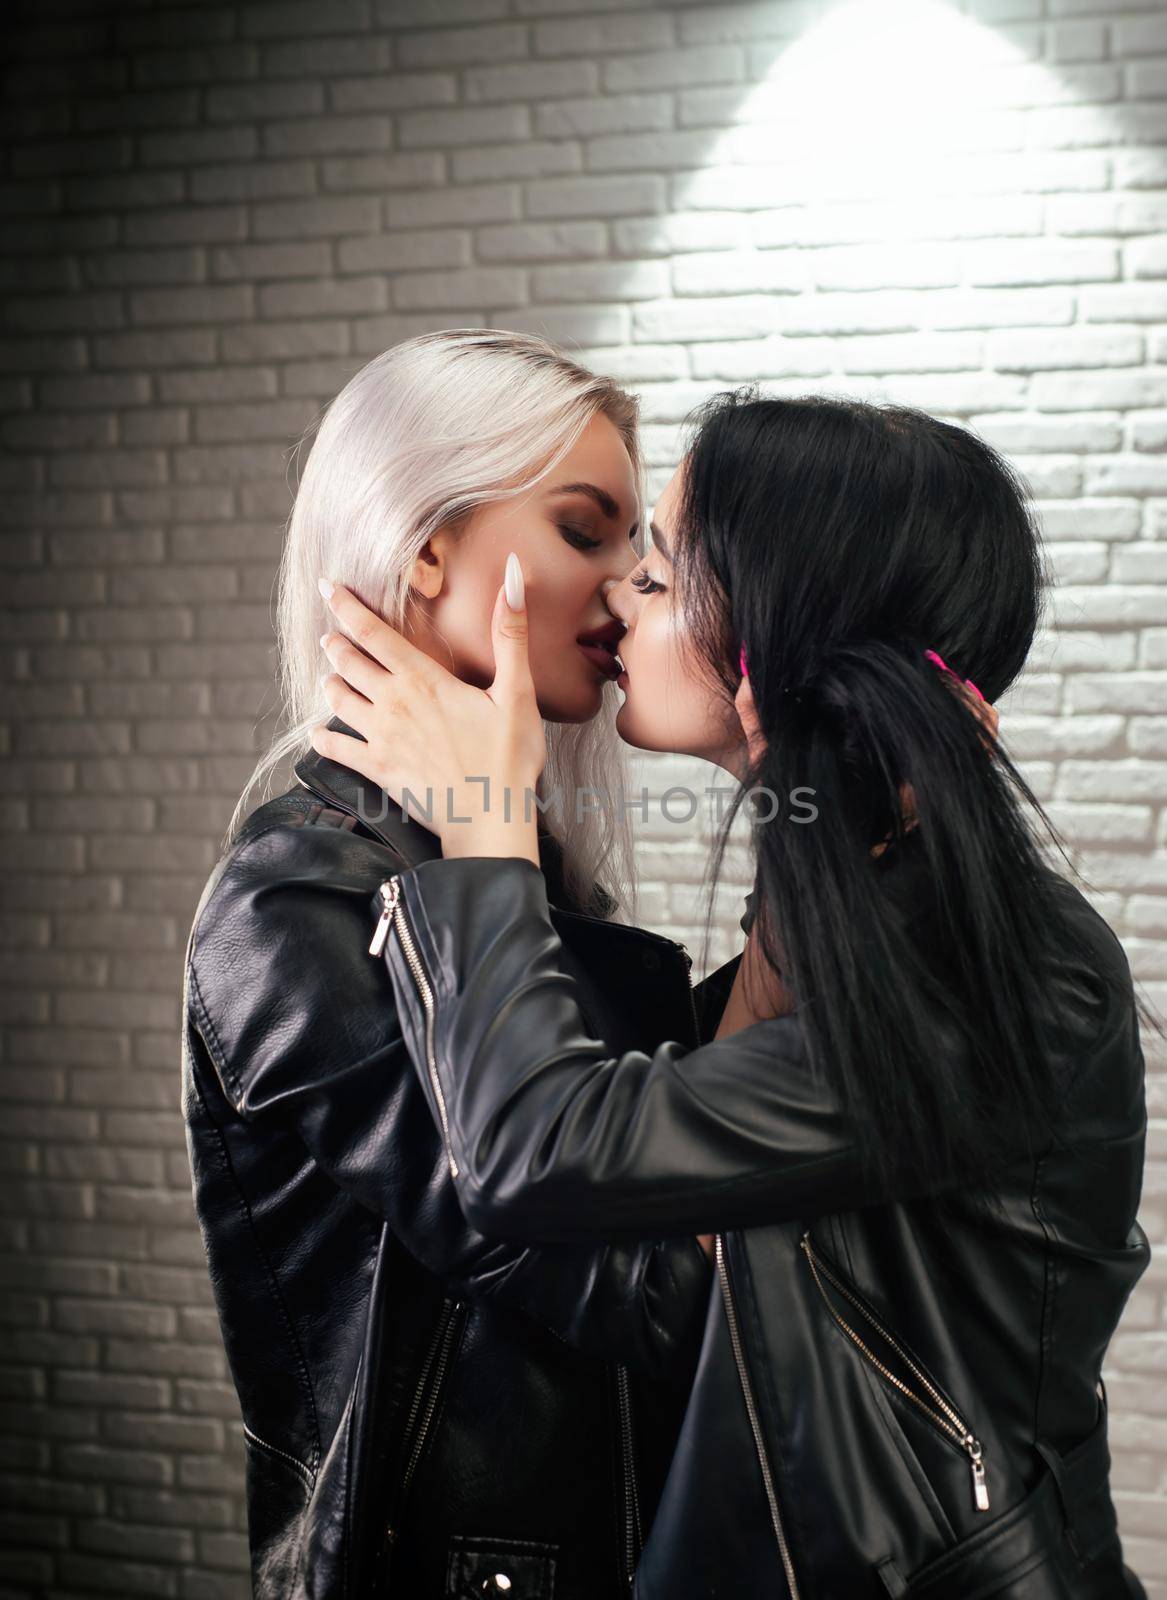 the two young lesbian lgbt women in leather jackets kiss on the lips against a white brick wall